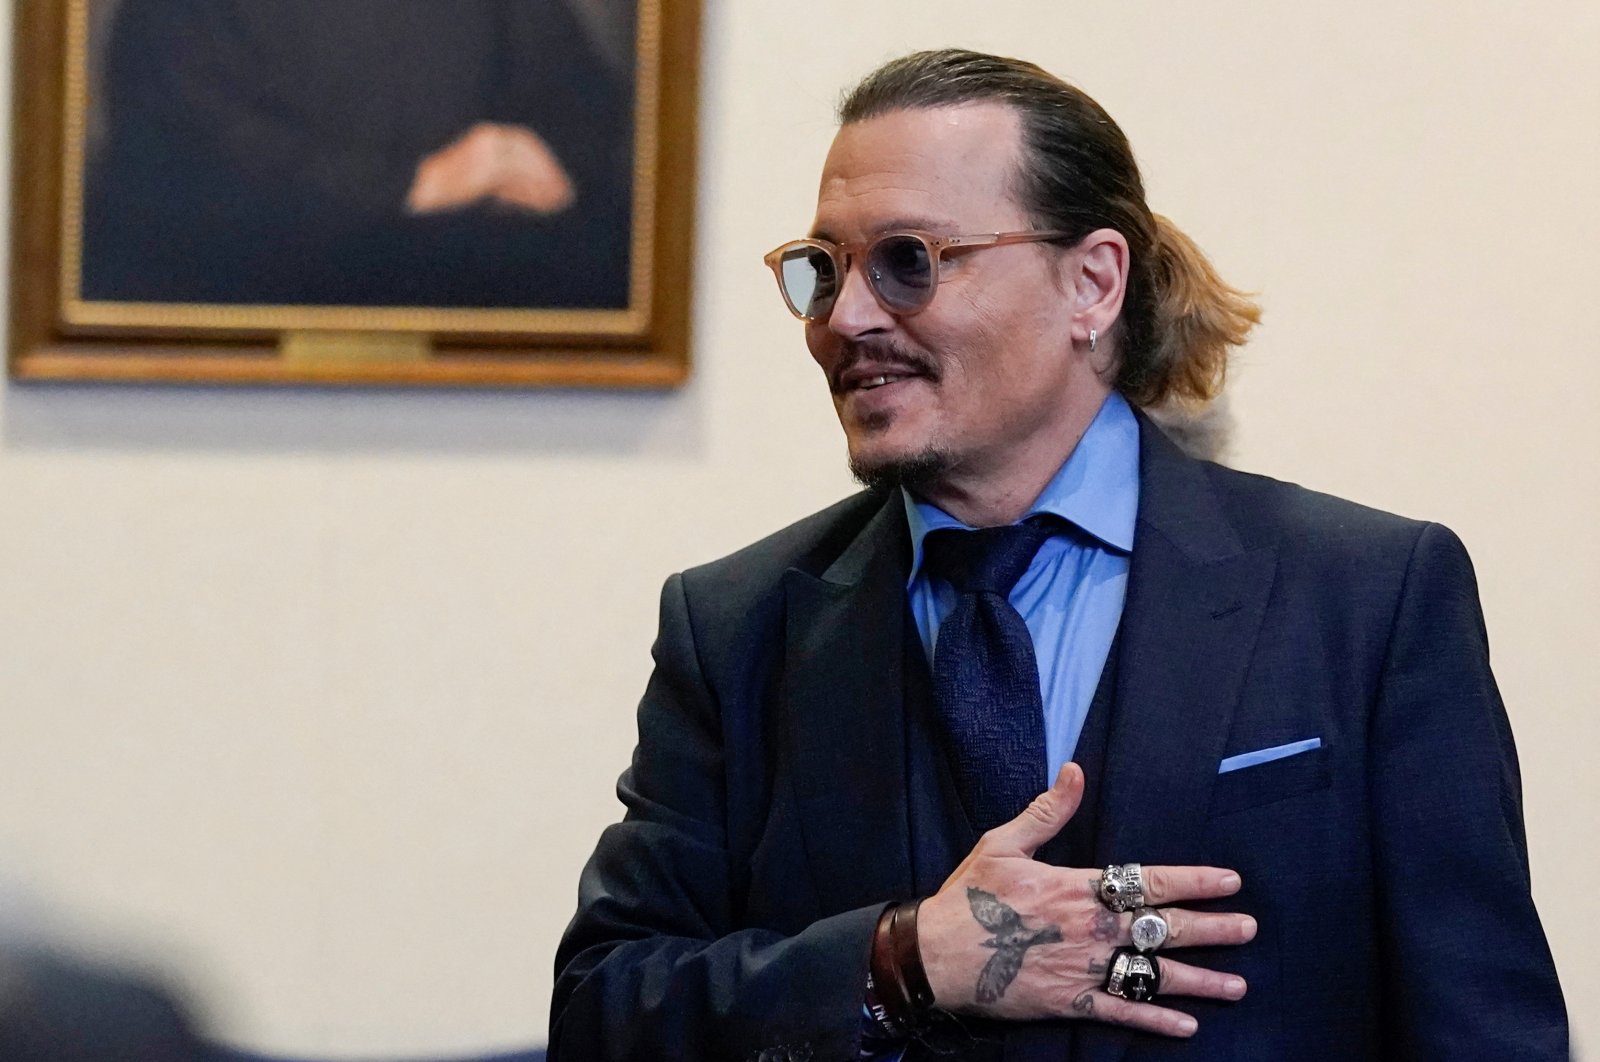 Actor Johnny Depp gestures to spectators in court after closing arguments during his defamation case against ex-wife Amber Heard at the Fairfax County Circuit Courthouse in Fairfax, Virginia, U.S., May 27, 2022. (Reuters Photo)